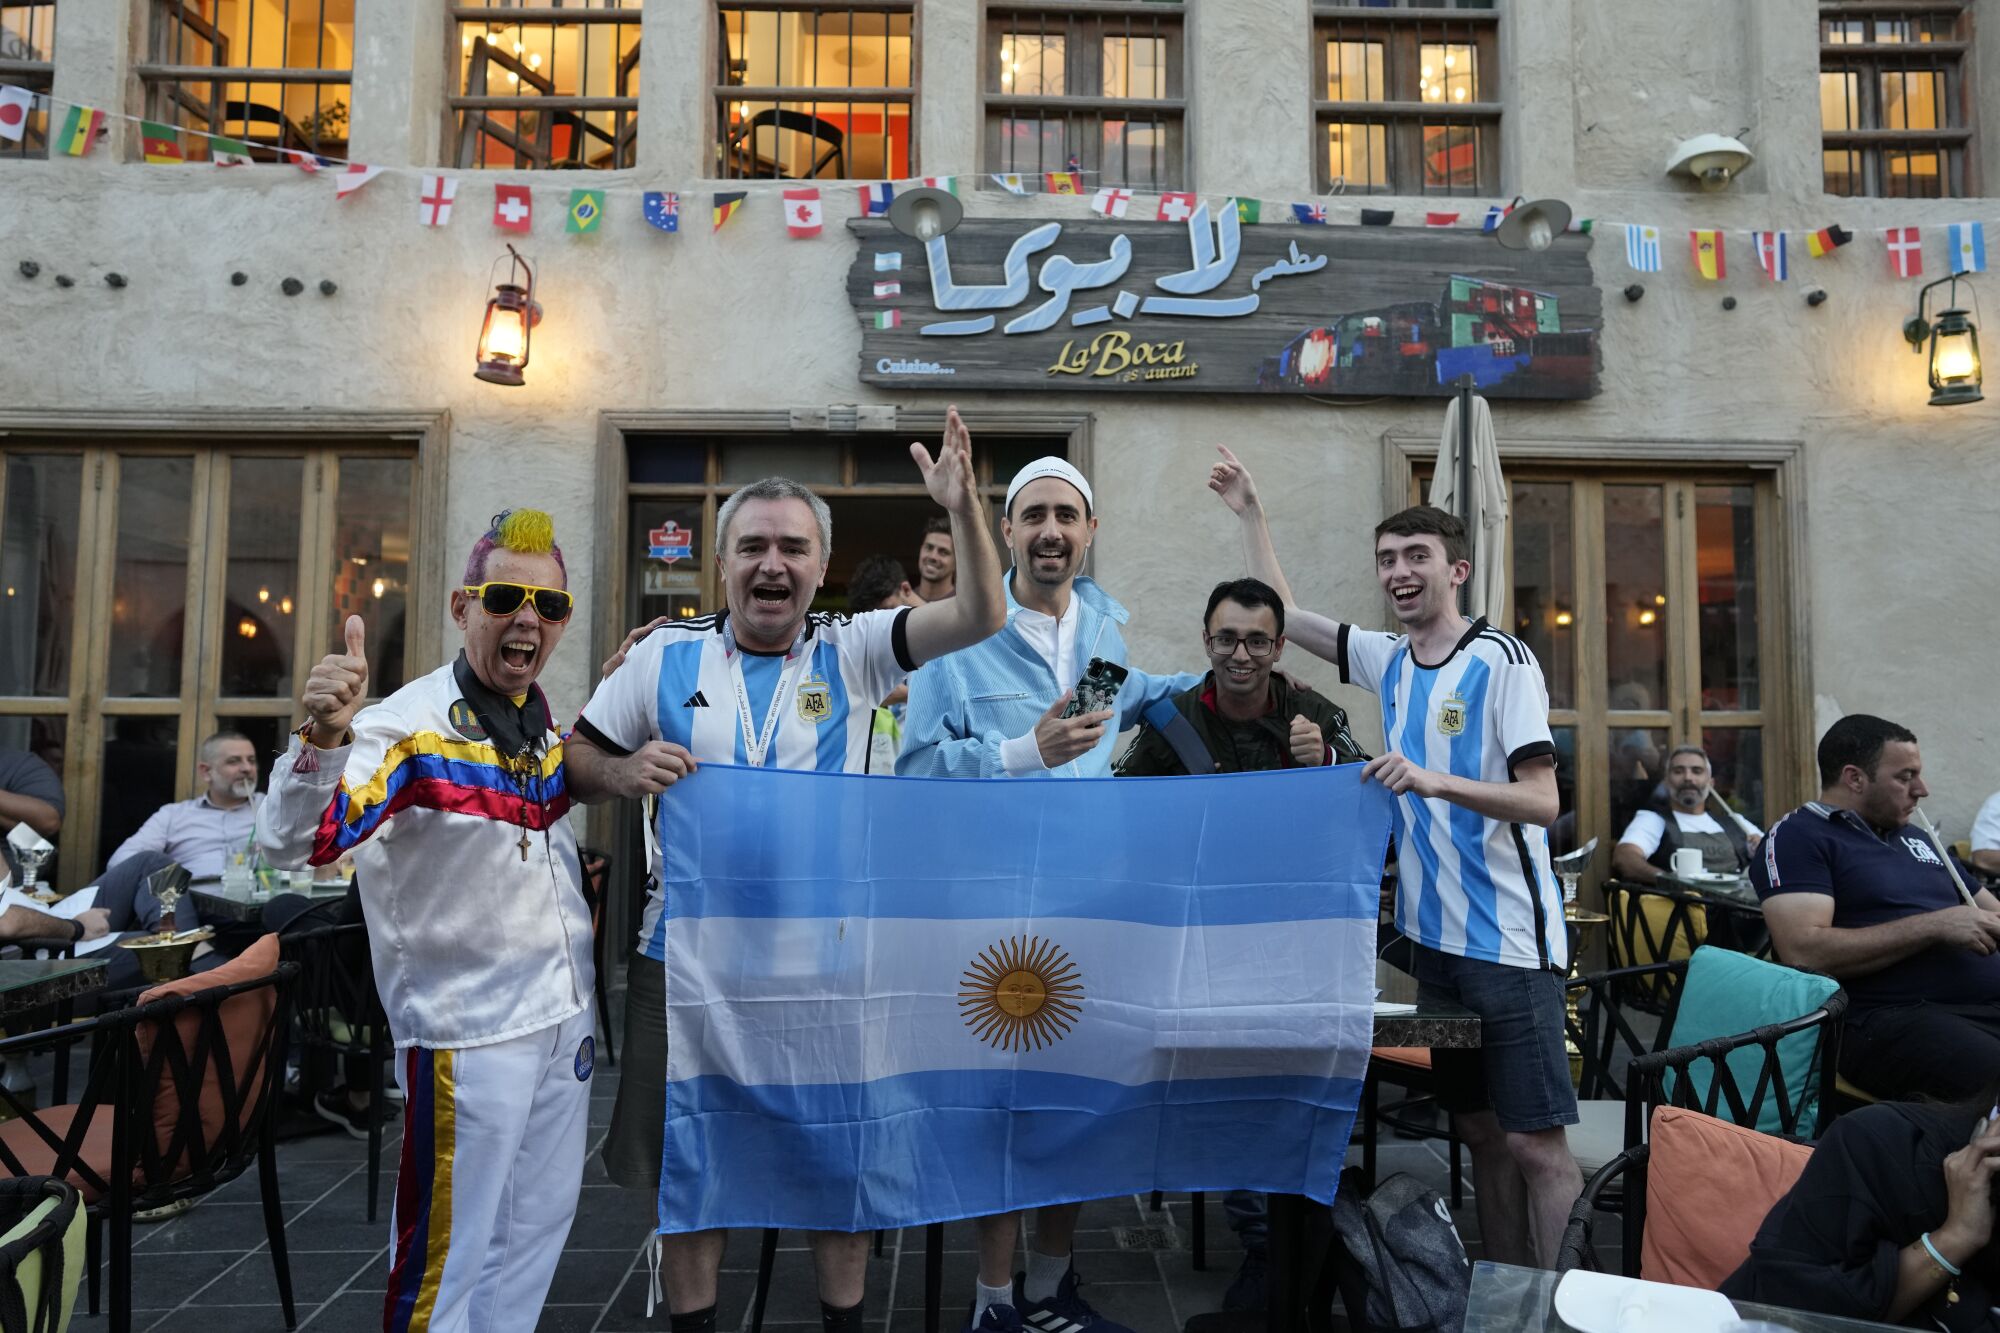 Fans of Argentina cheer for their team in Souq Waqif marke